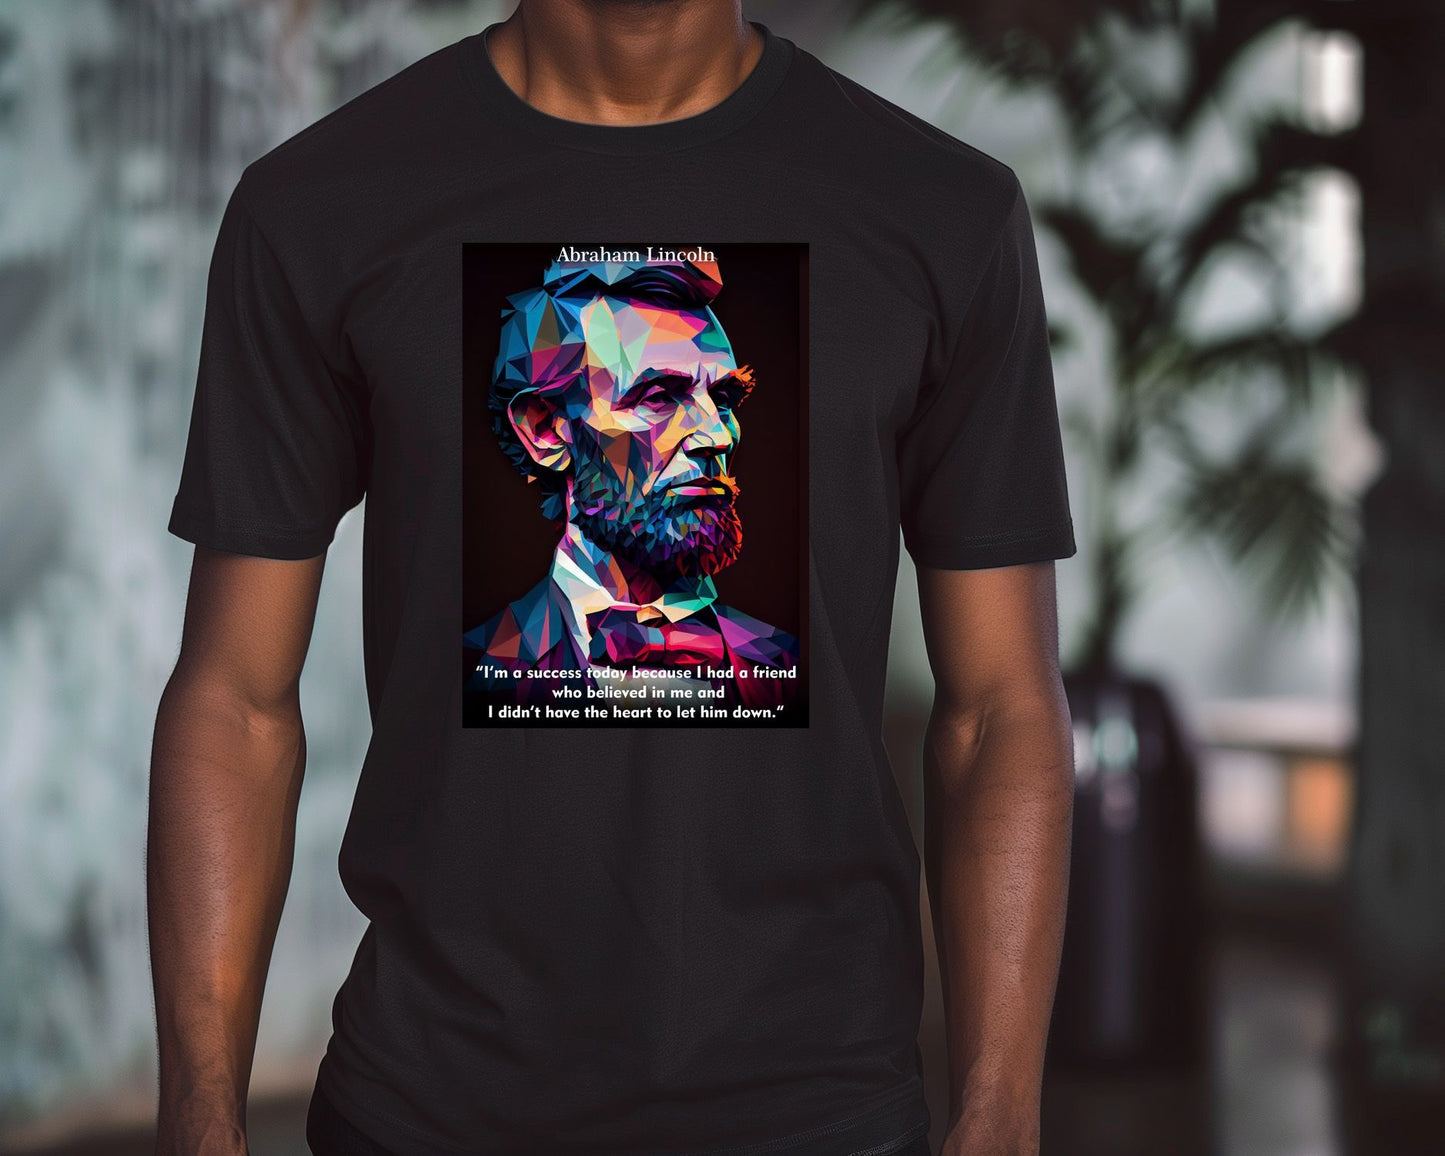 Abraham Lincoln Quotes - @WpapArtist